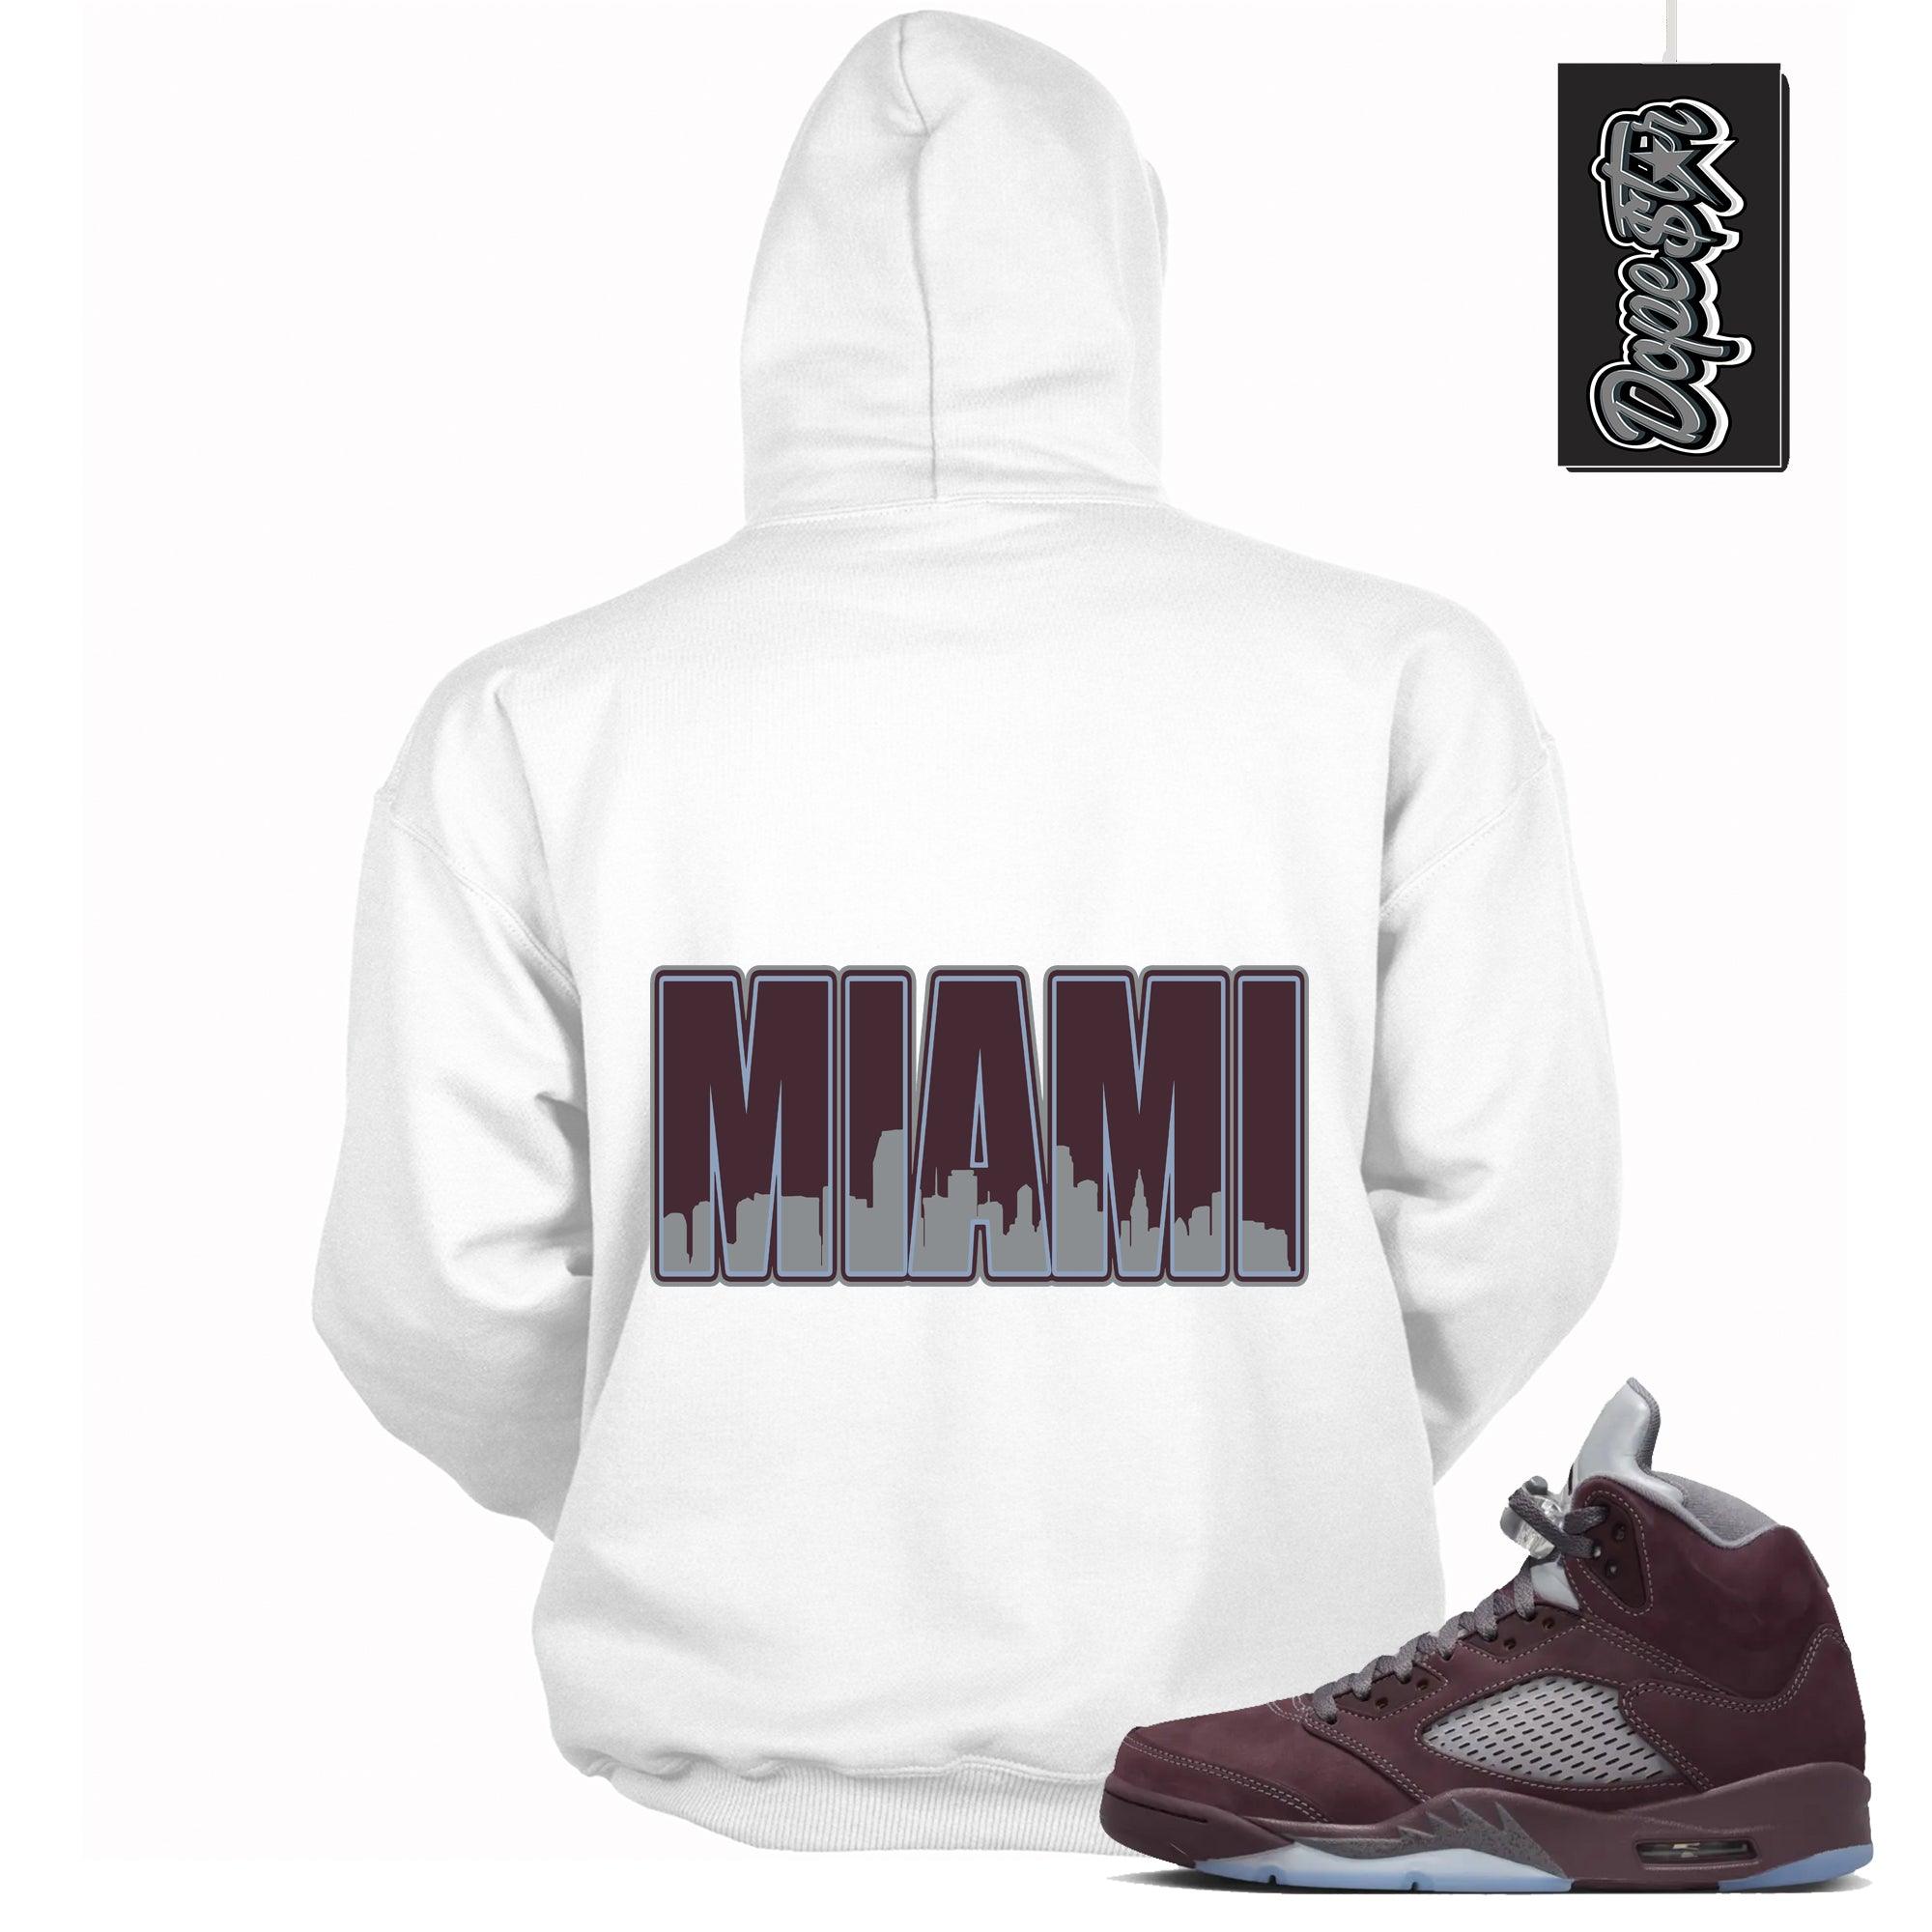 Cool White Graphic Hoodie with “ MIAMI “ print, that perfectly matches Air Jordan 5 Burgundy 2023 sneakers